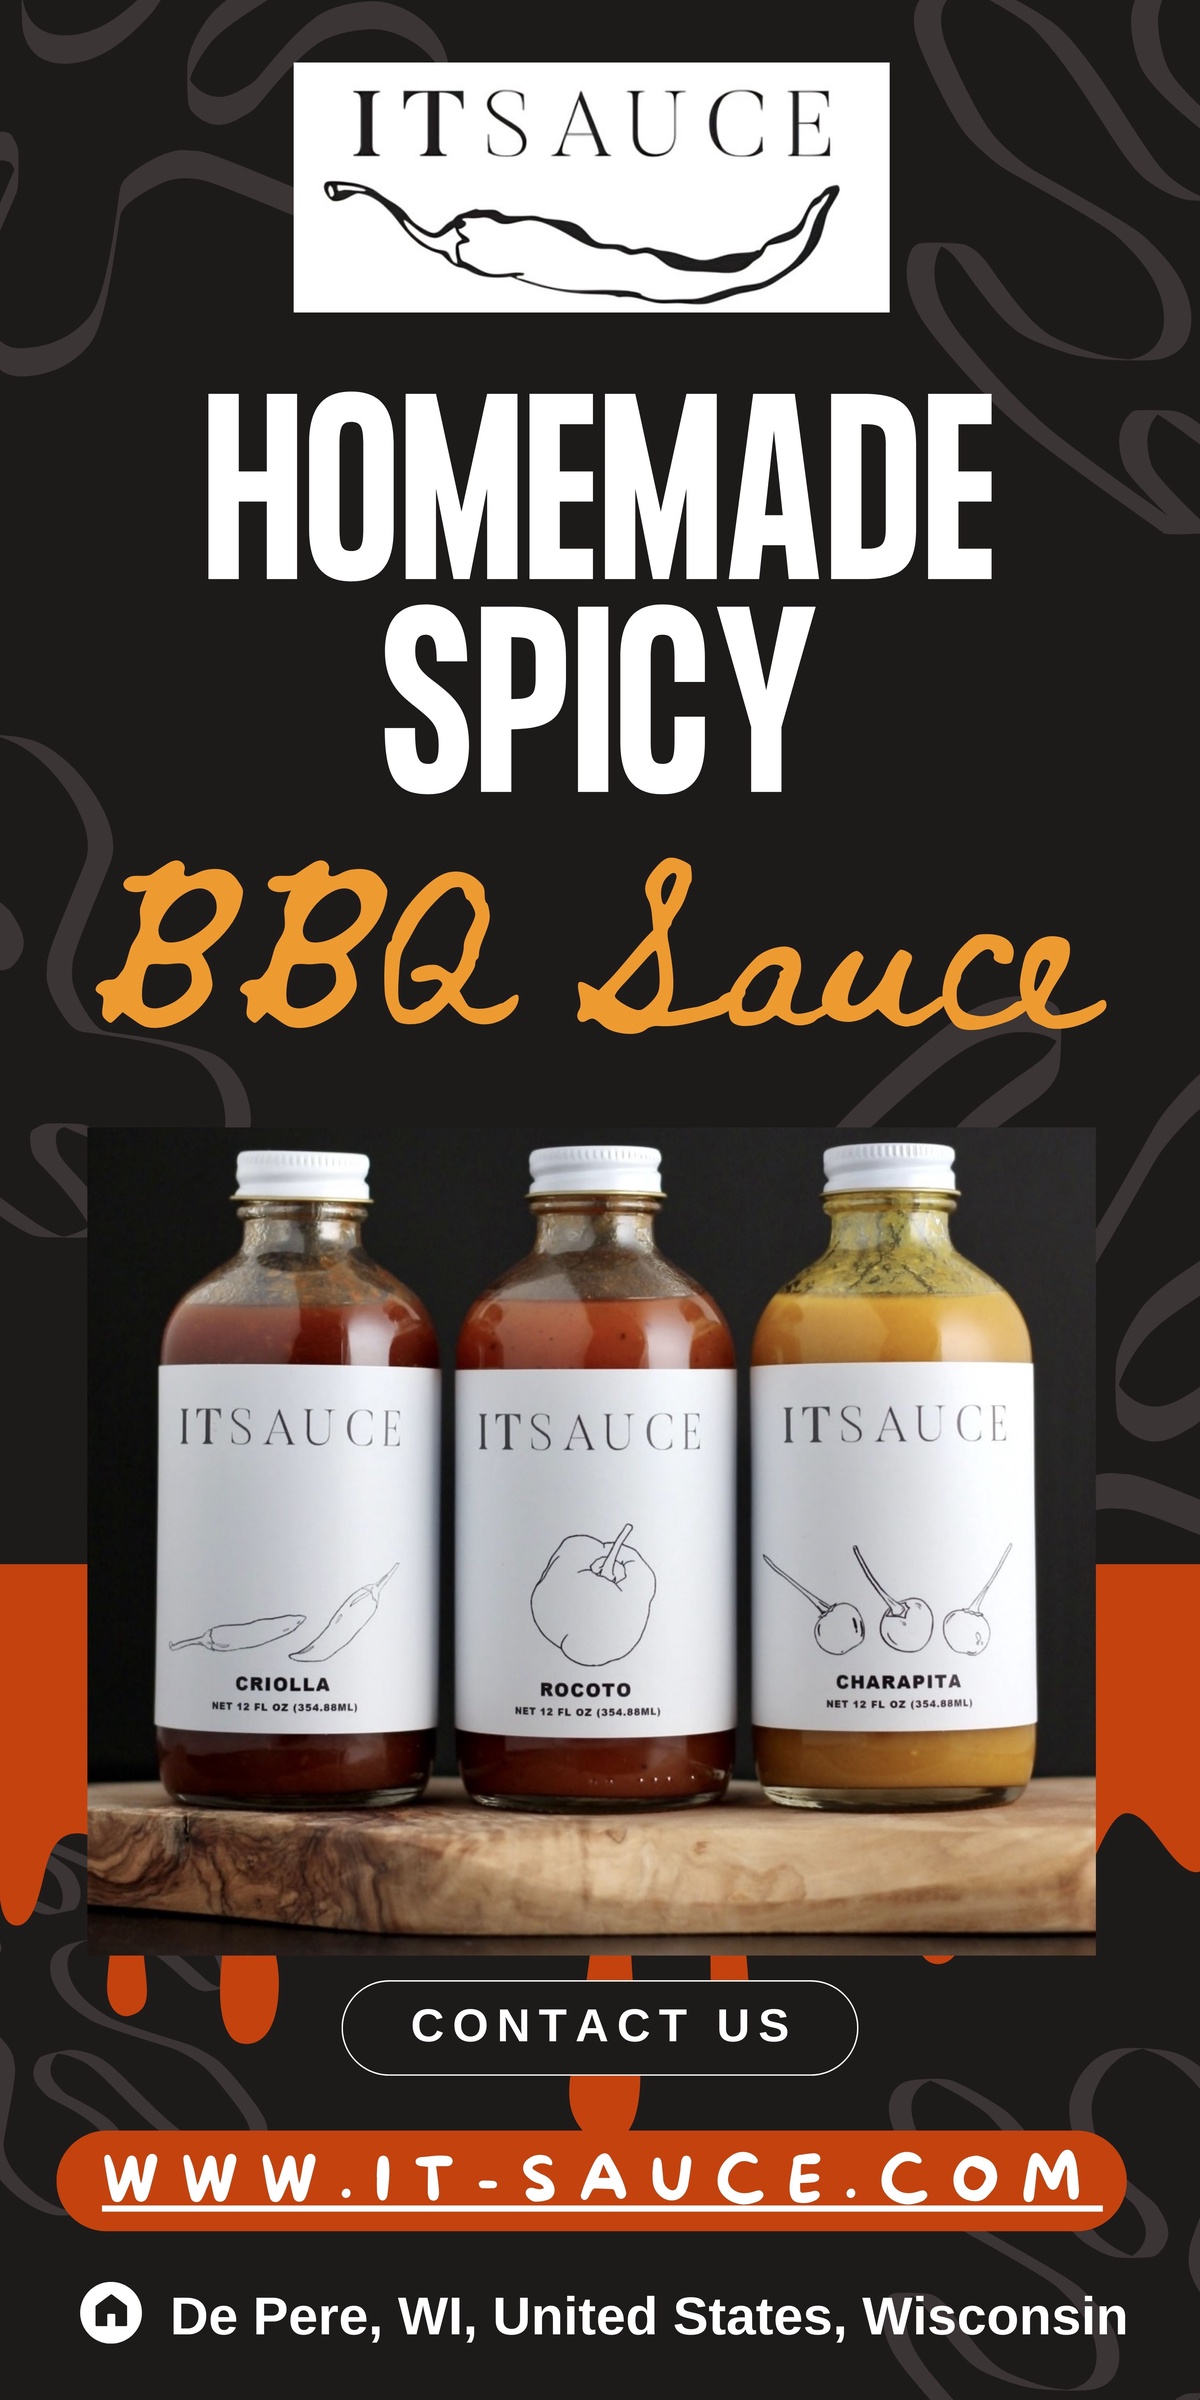 What is the best use of homemade spicy BBQ sauce?